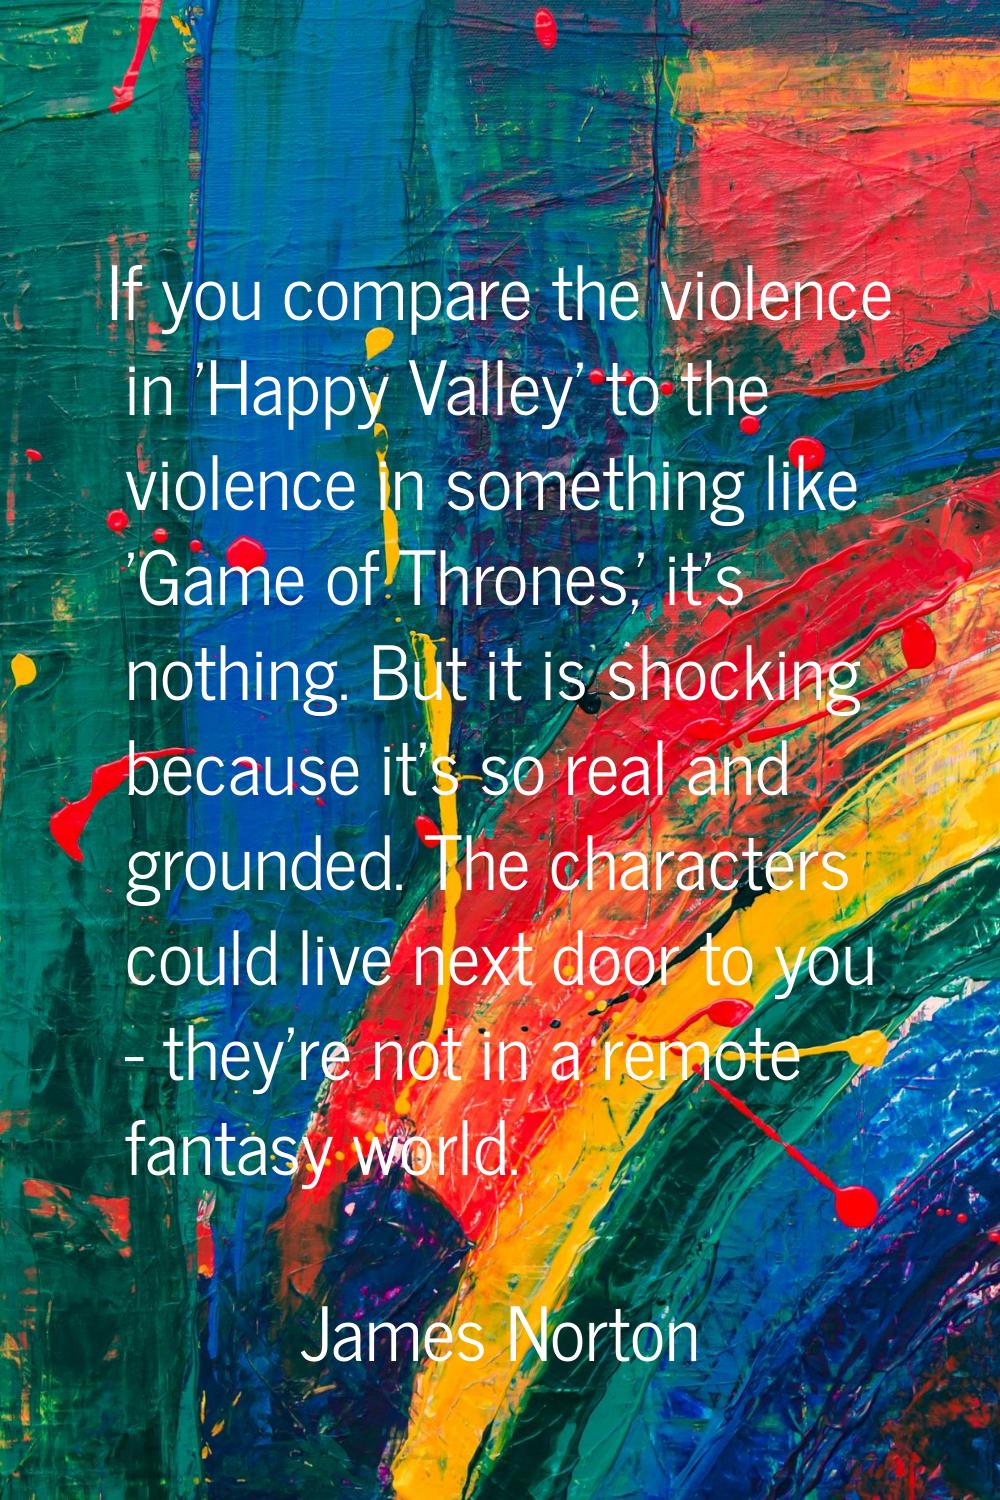 If you compare the violence in 'Happy Valley' to the violence in something like 'Game of Thrones,' 